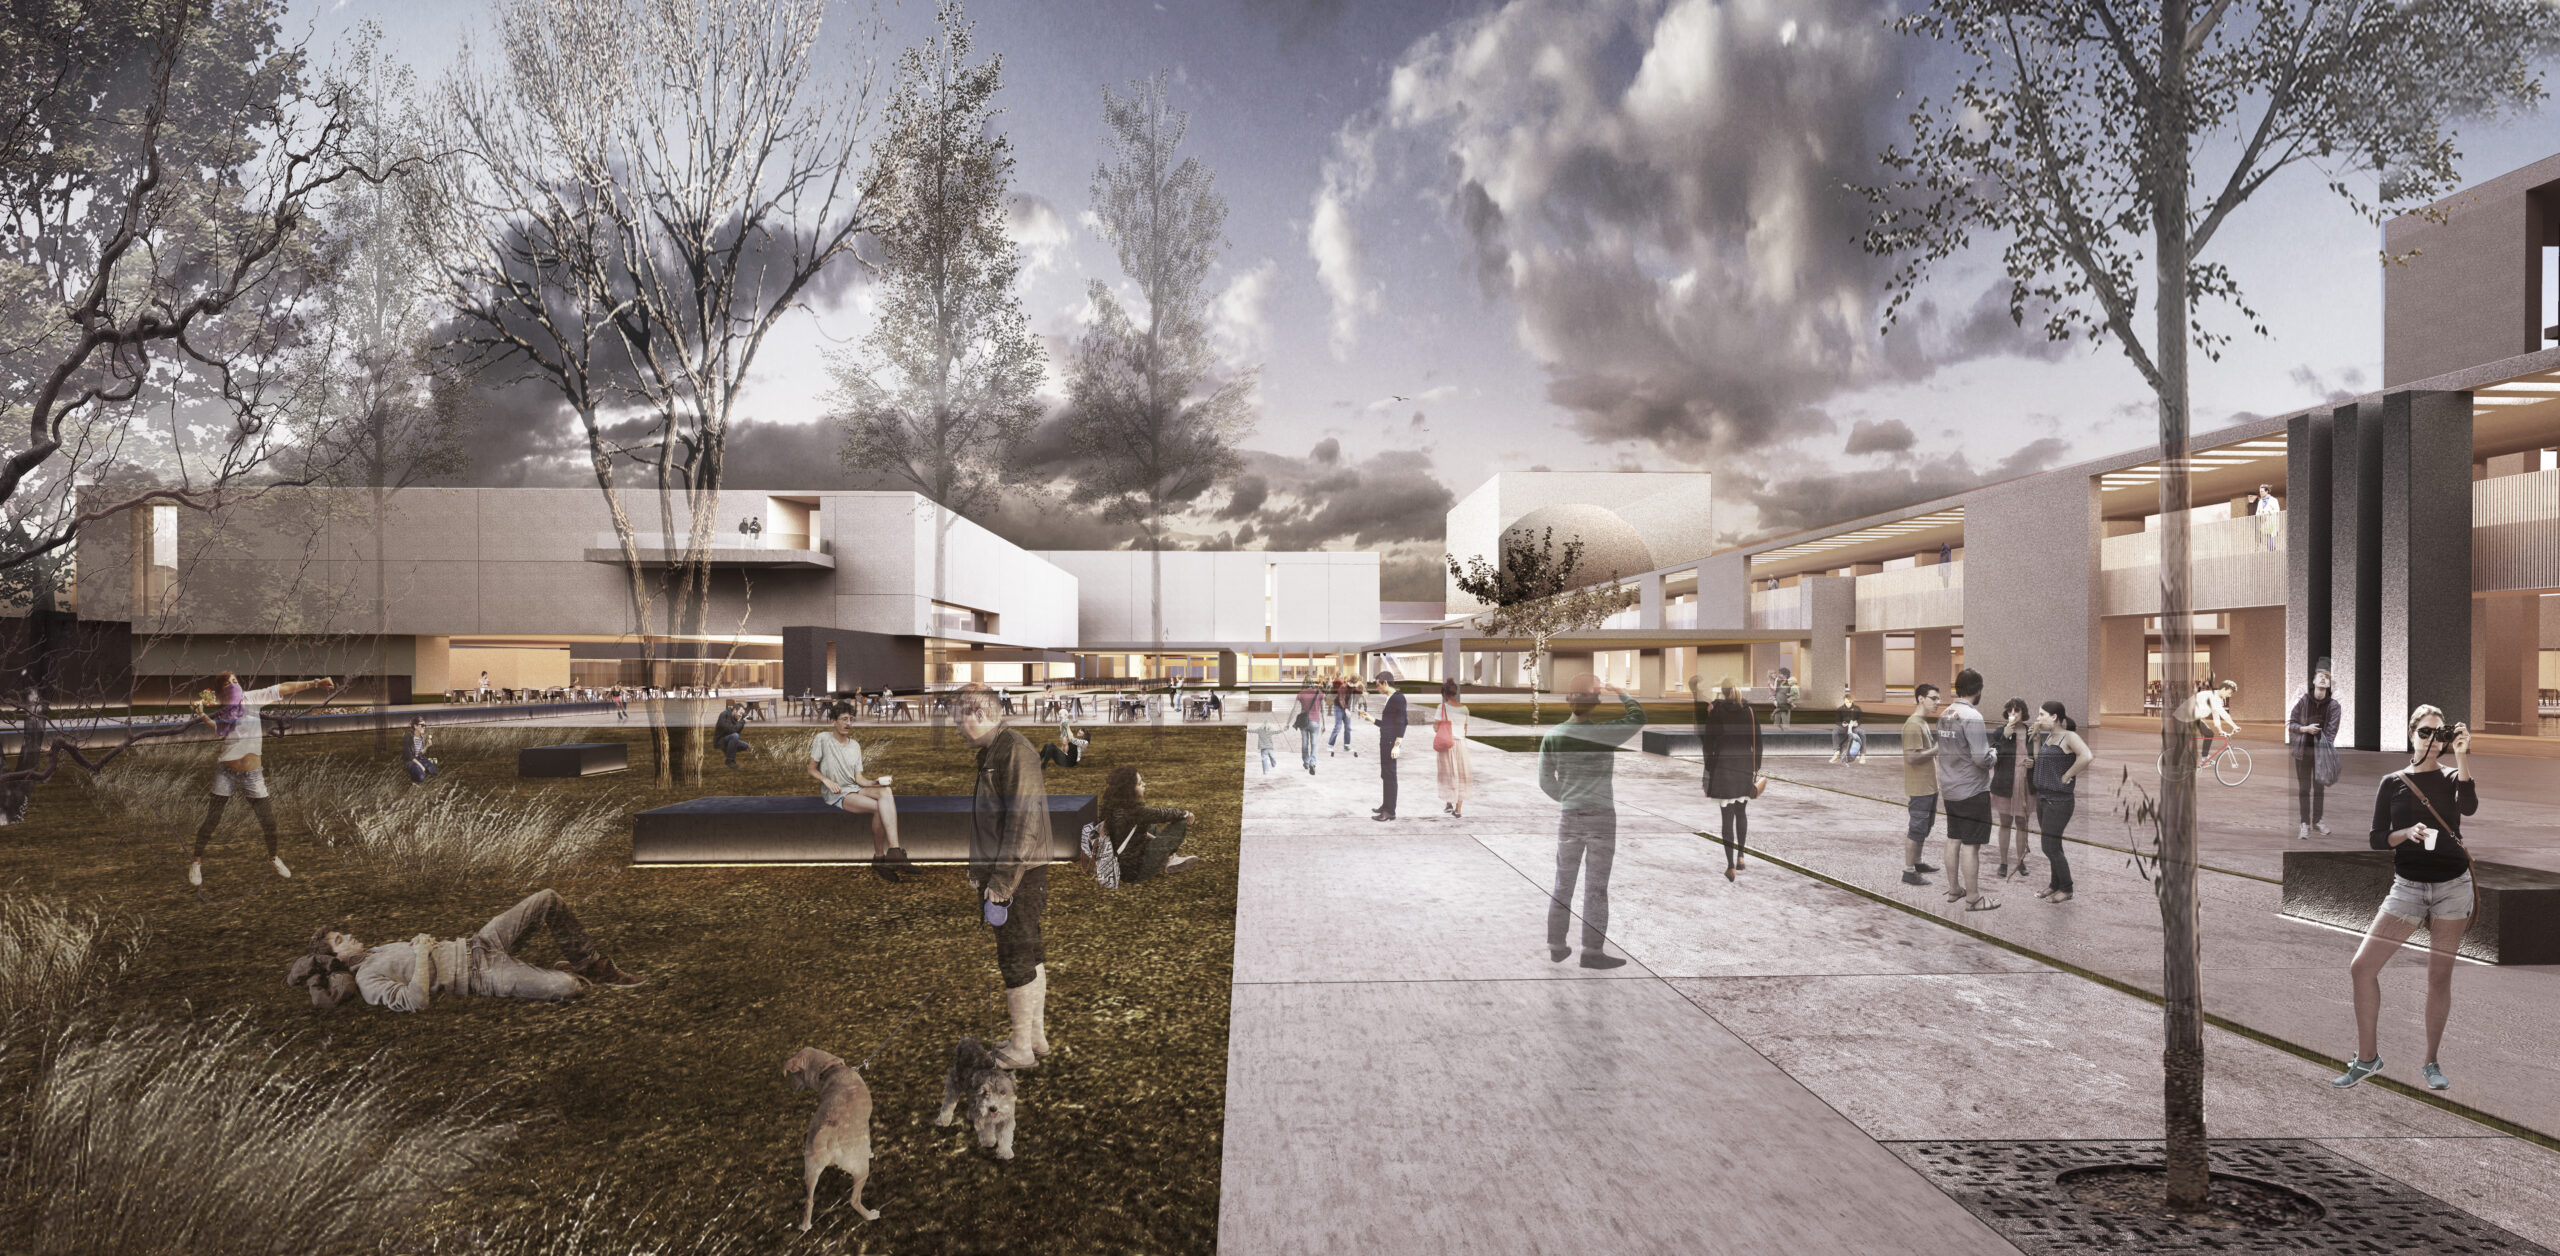 EAA – EMRE AROLAT ARCHITECTURE | MERSIN SCIENCE AND YOUTH PARK